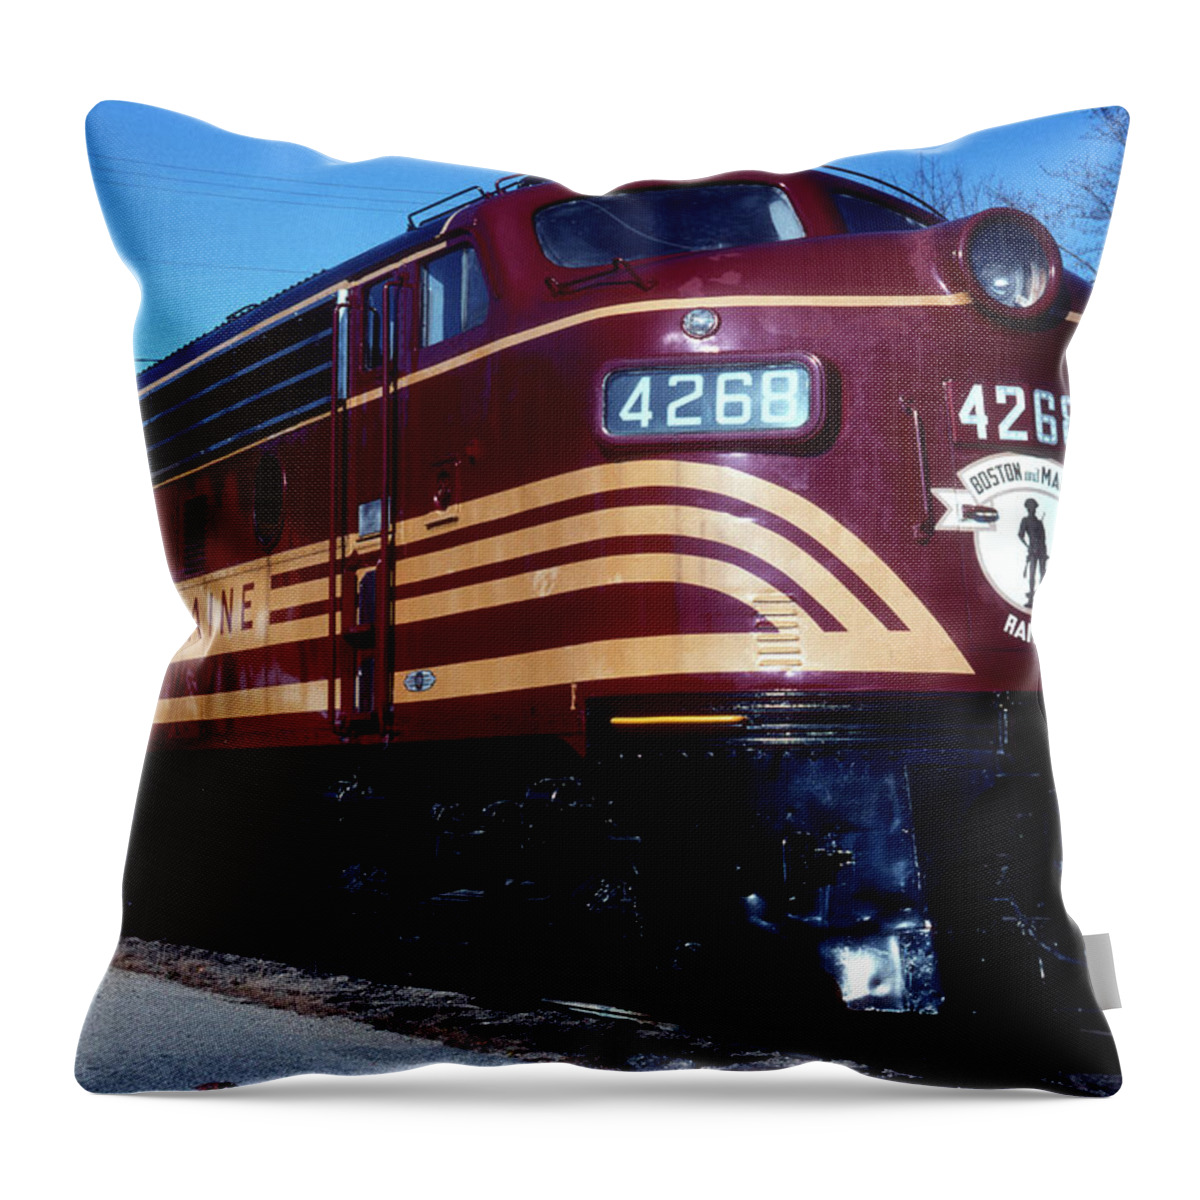  Throw Pillow featuring the photograph Boston and Maine Railroad Locomotive, Conway, New Hampshire, 199 by A Macarthur Gurmankin